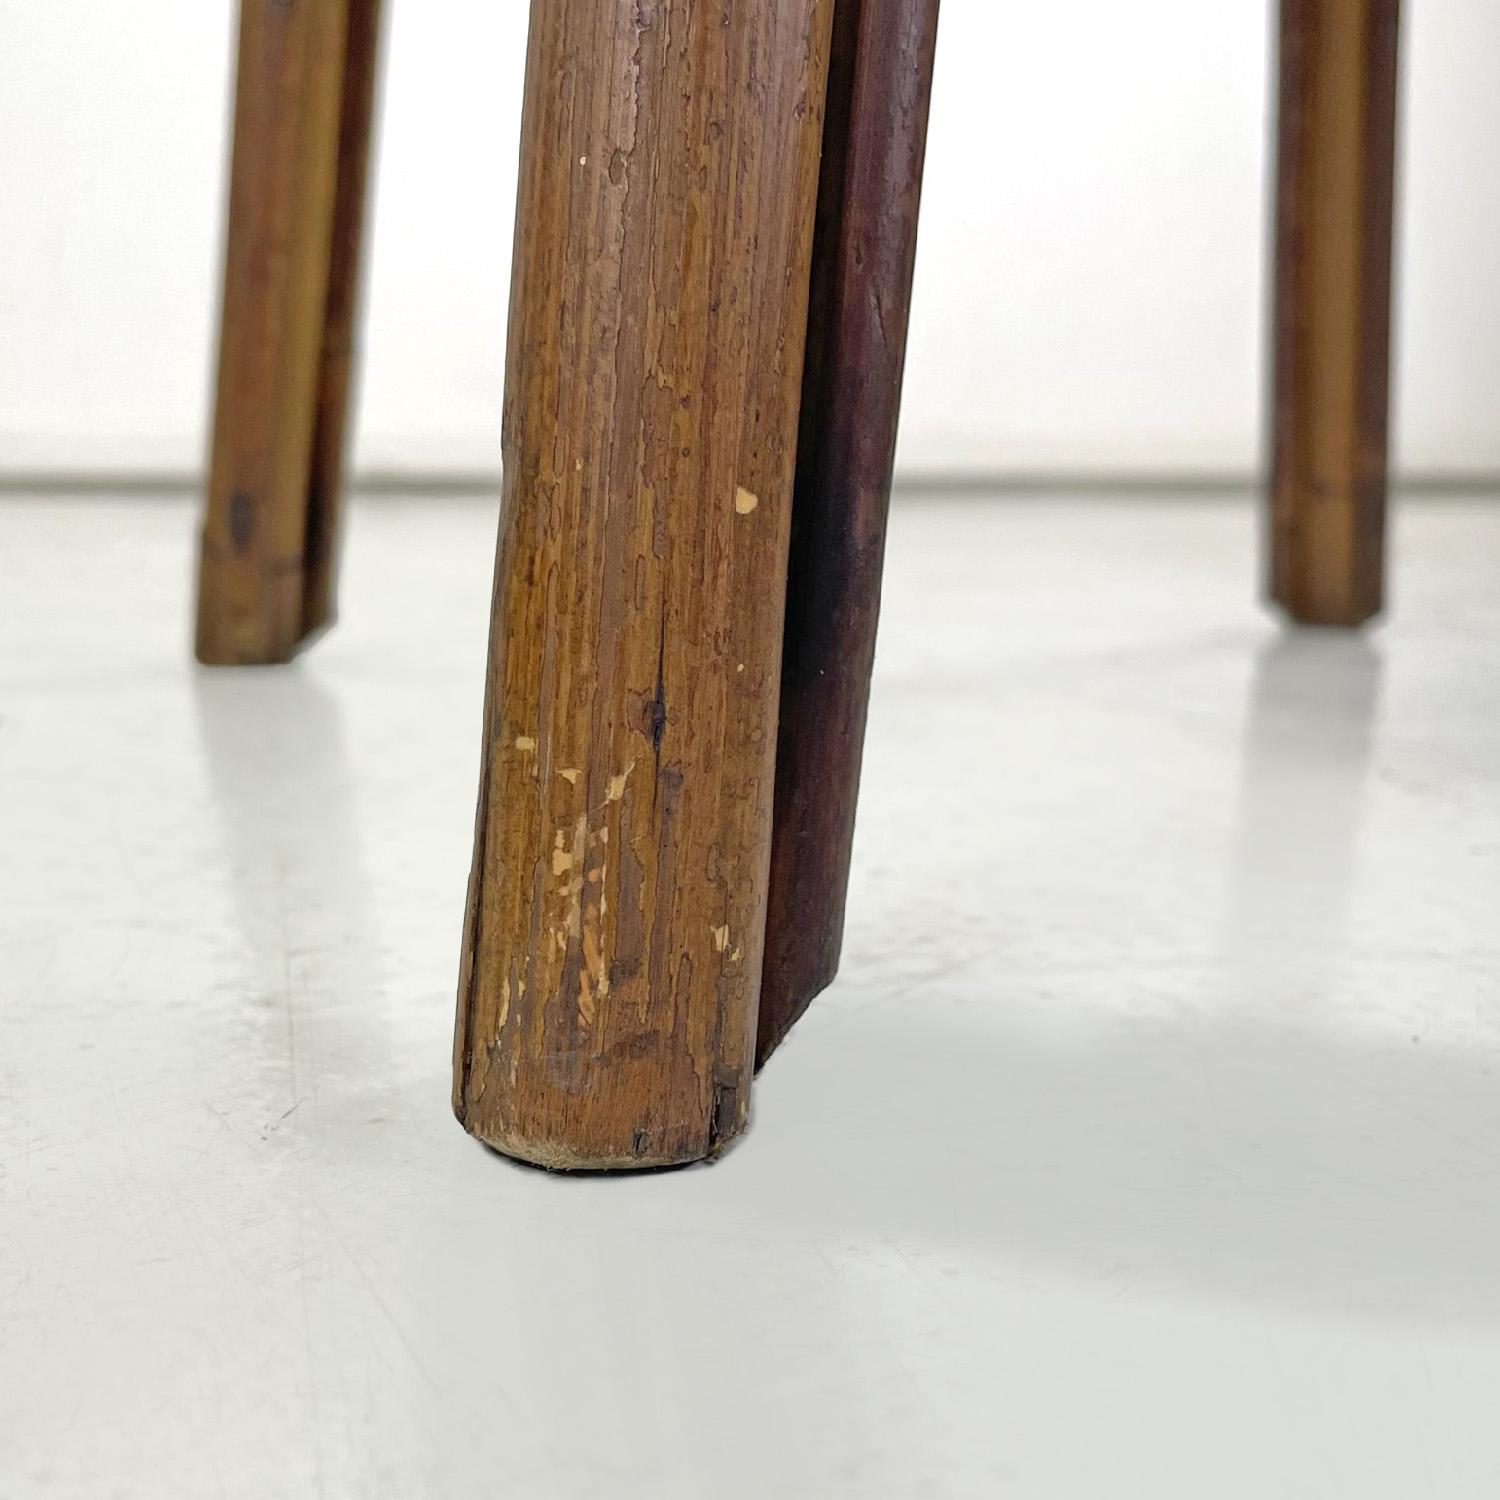 Italian mid-century modern coffee tables in bamboo and aluminum, 1960s For Sale 3